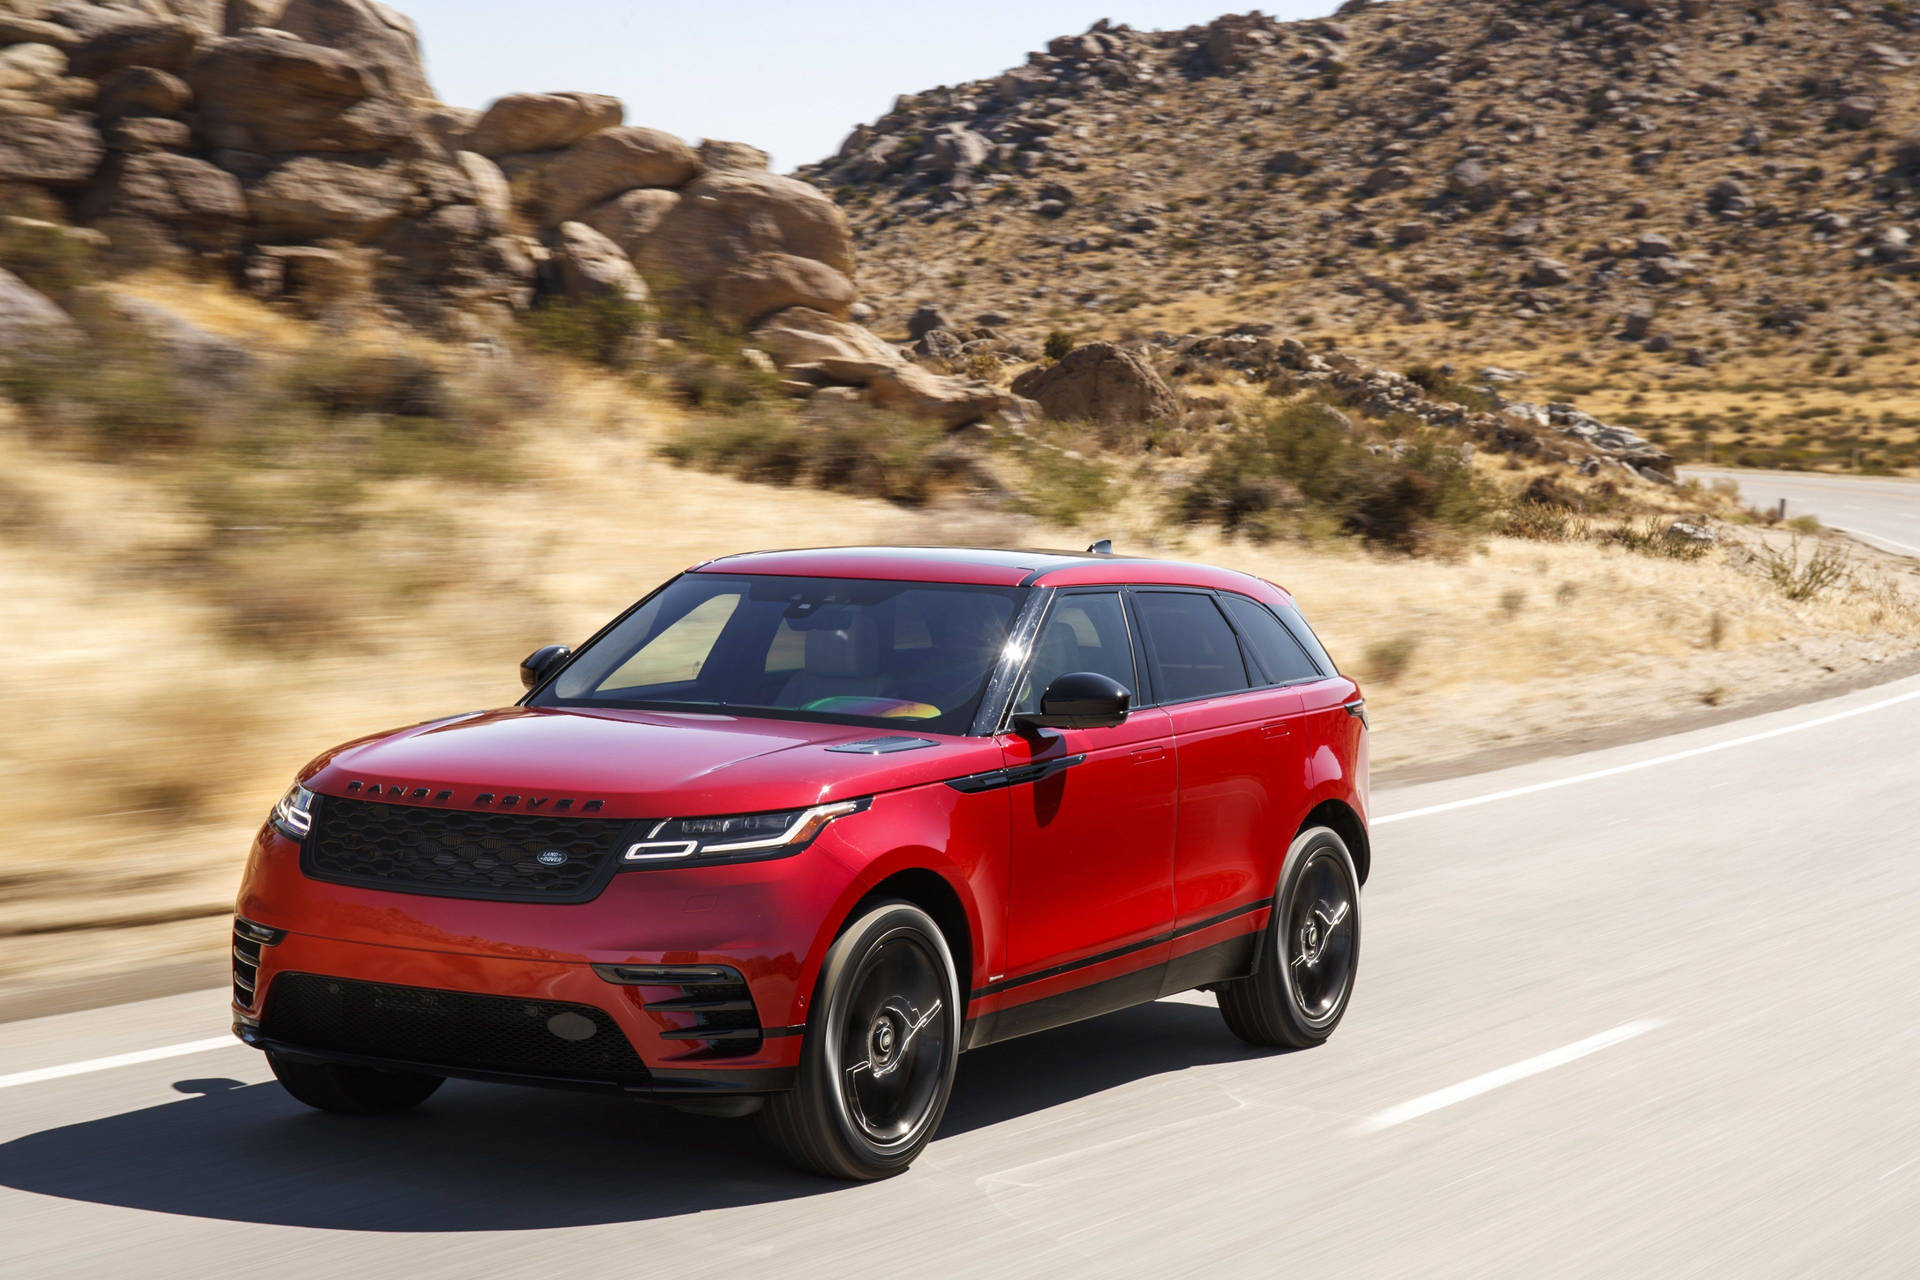 Red SUV land rover wallpaper